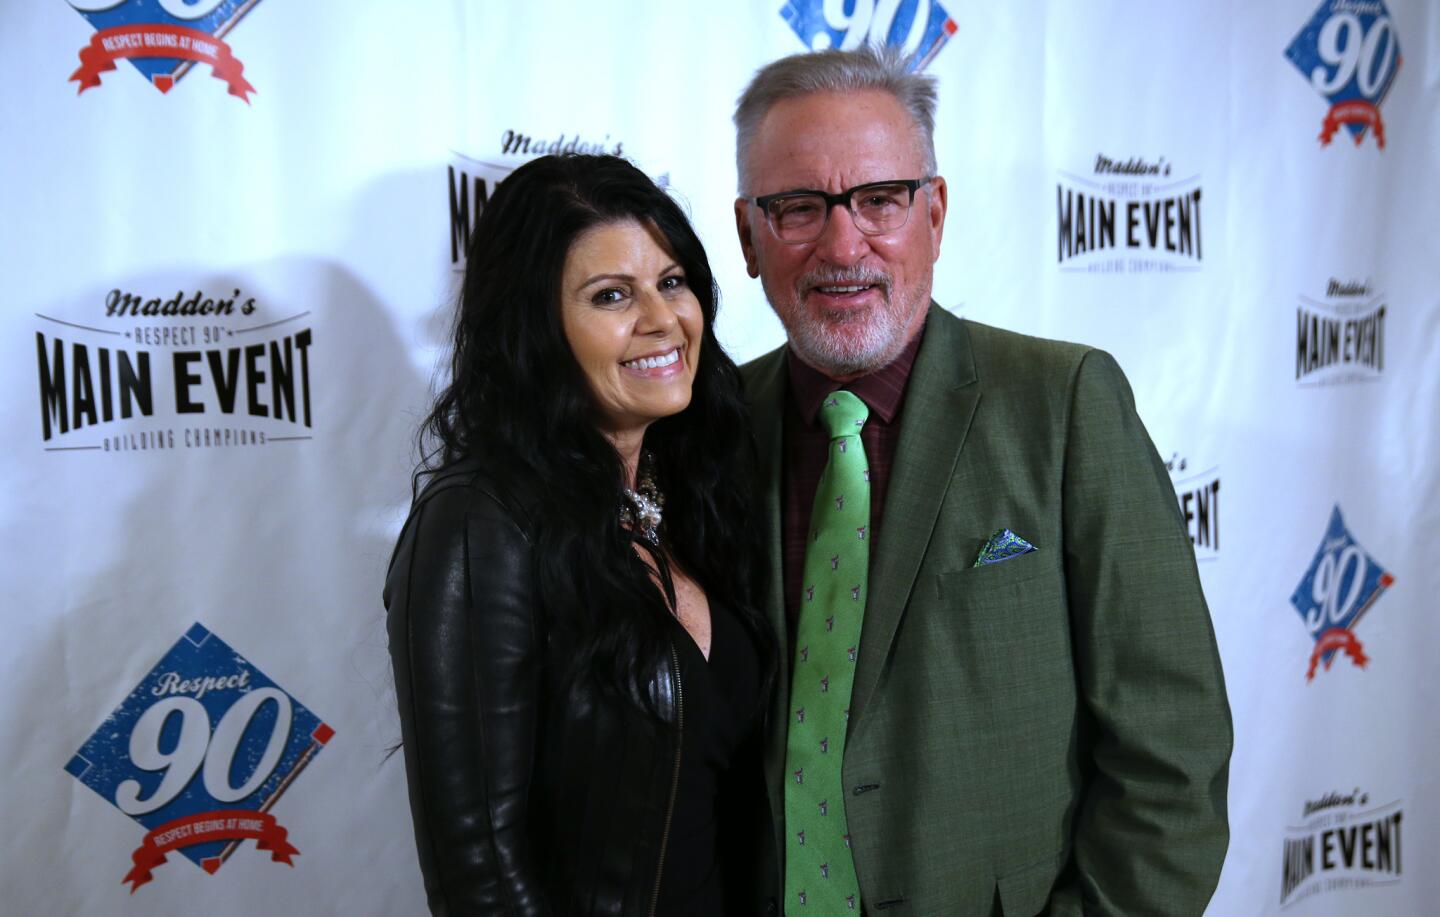 Jaye Maddon, left, and her husband, Cubs manager Joe Maddon, host the third annual Respect 90 Main Event charity boxing fundraiser at the Wintrust Bank building in Chicago on Thursday, Aug. 17, 2017.